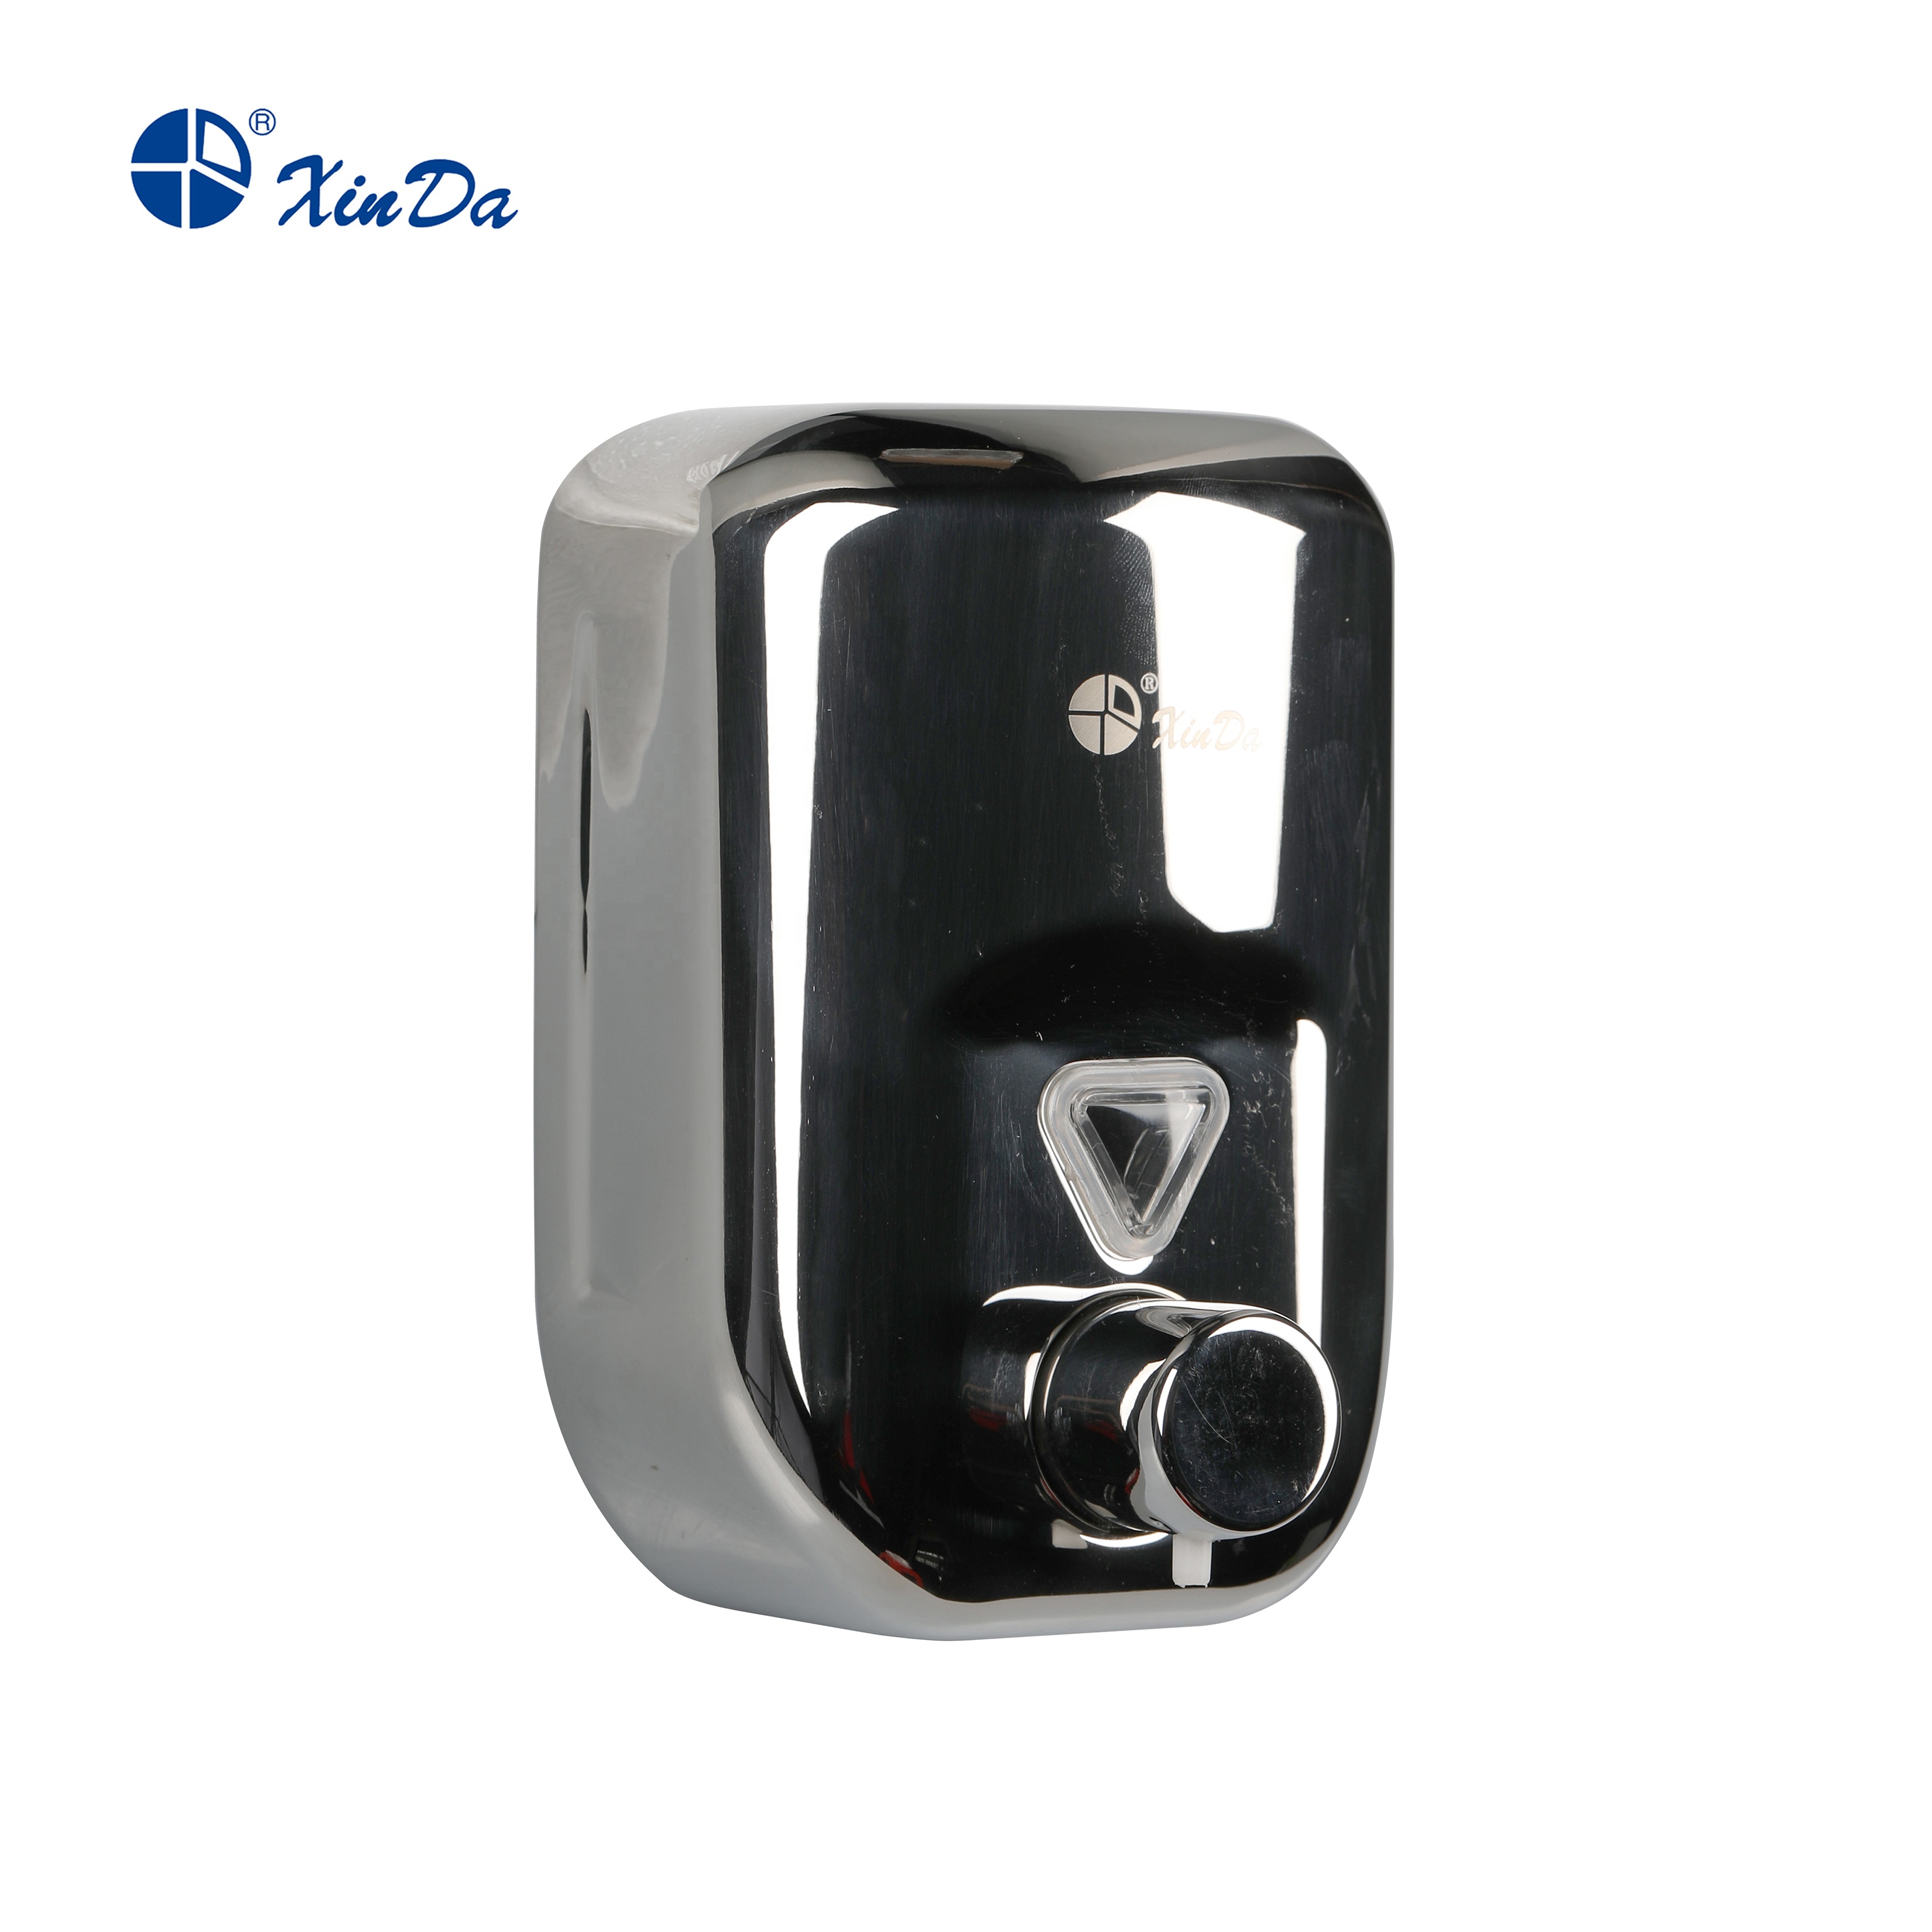 Soap Dispenser ZYQ 82 Metal Soap Dispenser Sanitize Push Pump Wall Mounted with Key-Locked Protection Soap Dispenser